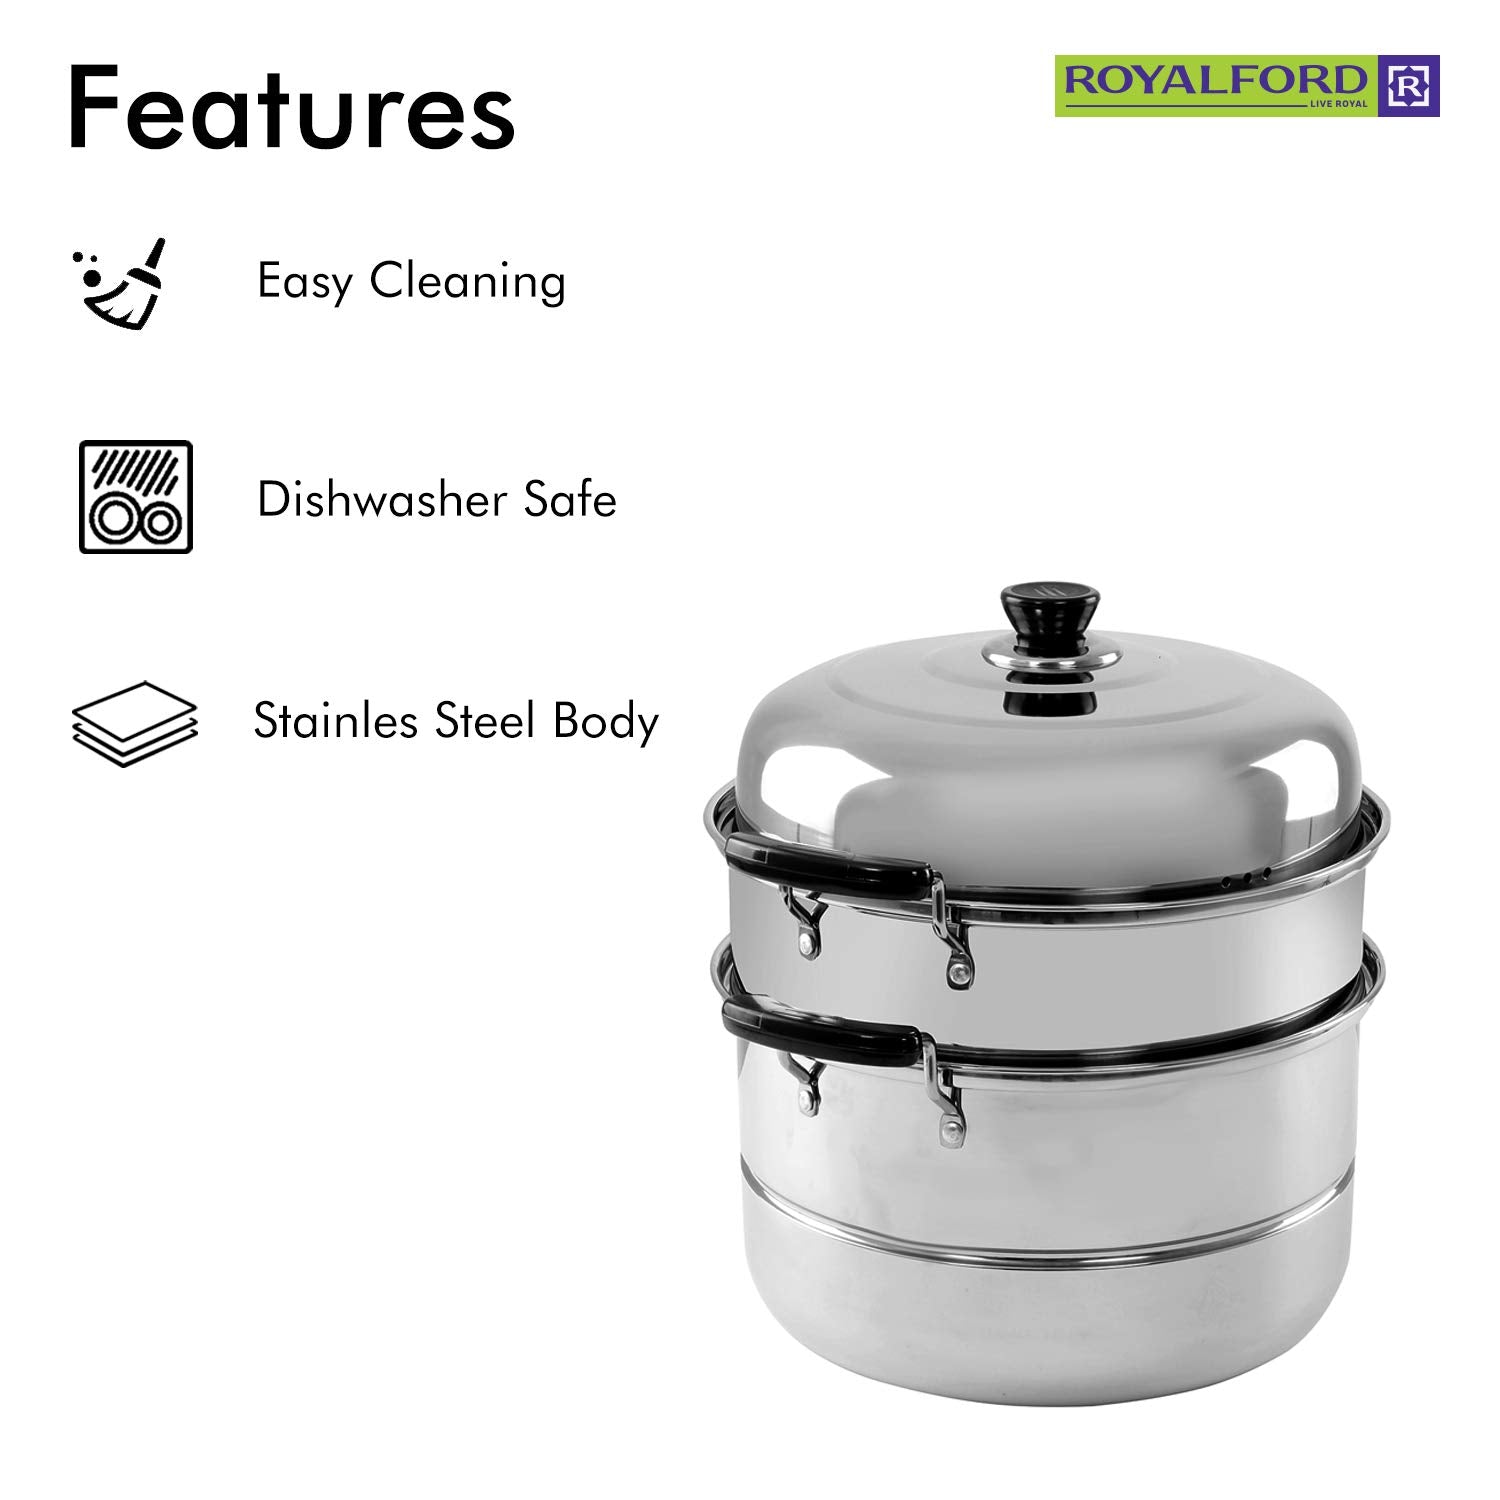 Royalford Induction-Safe Stainless Steel Large 3-Tier Food Steamer Pot with Lid| Double Layer Multi Food Cook Stock Pot - Cool Touch Handles - Stylish Design, Easy Food Release & Clean-Up - 9L